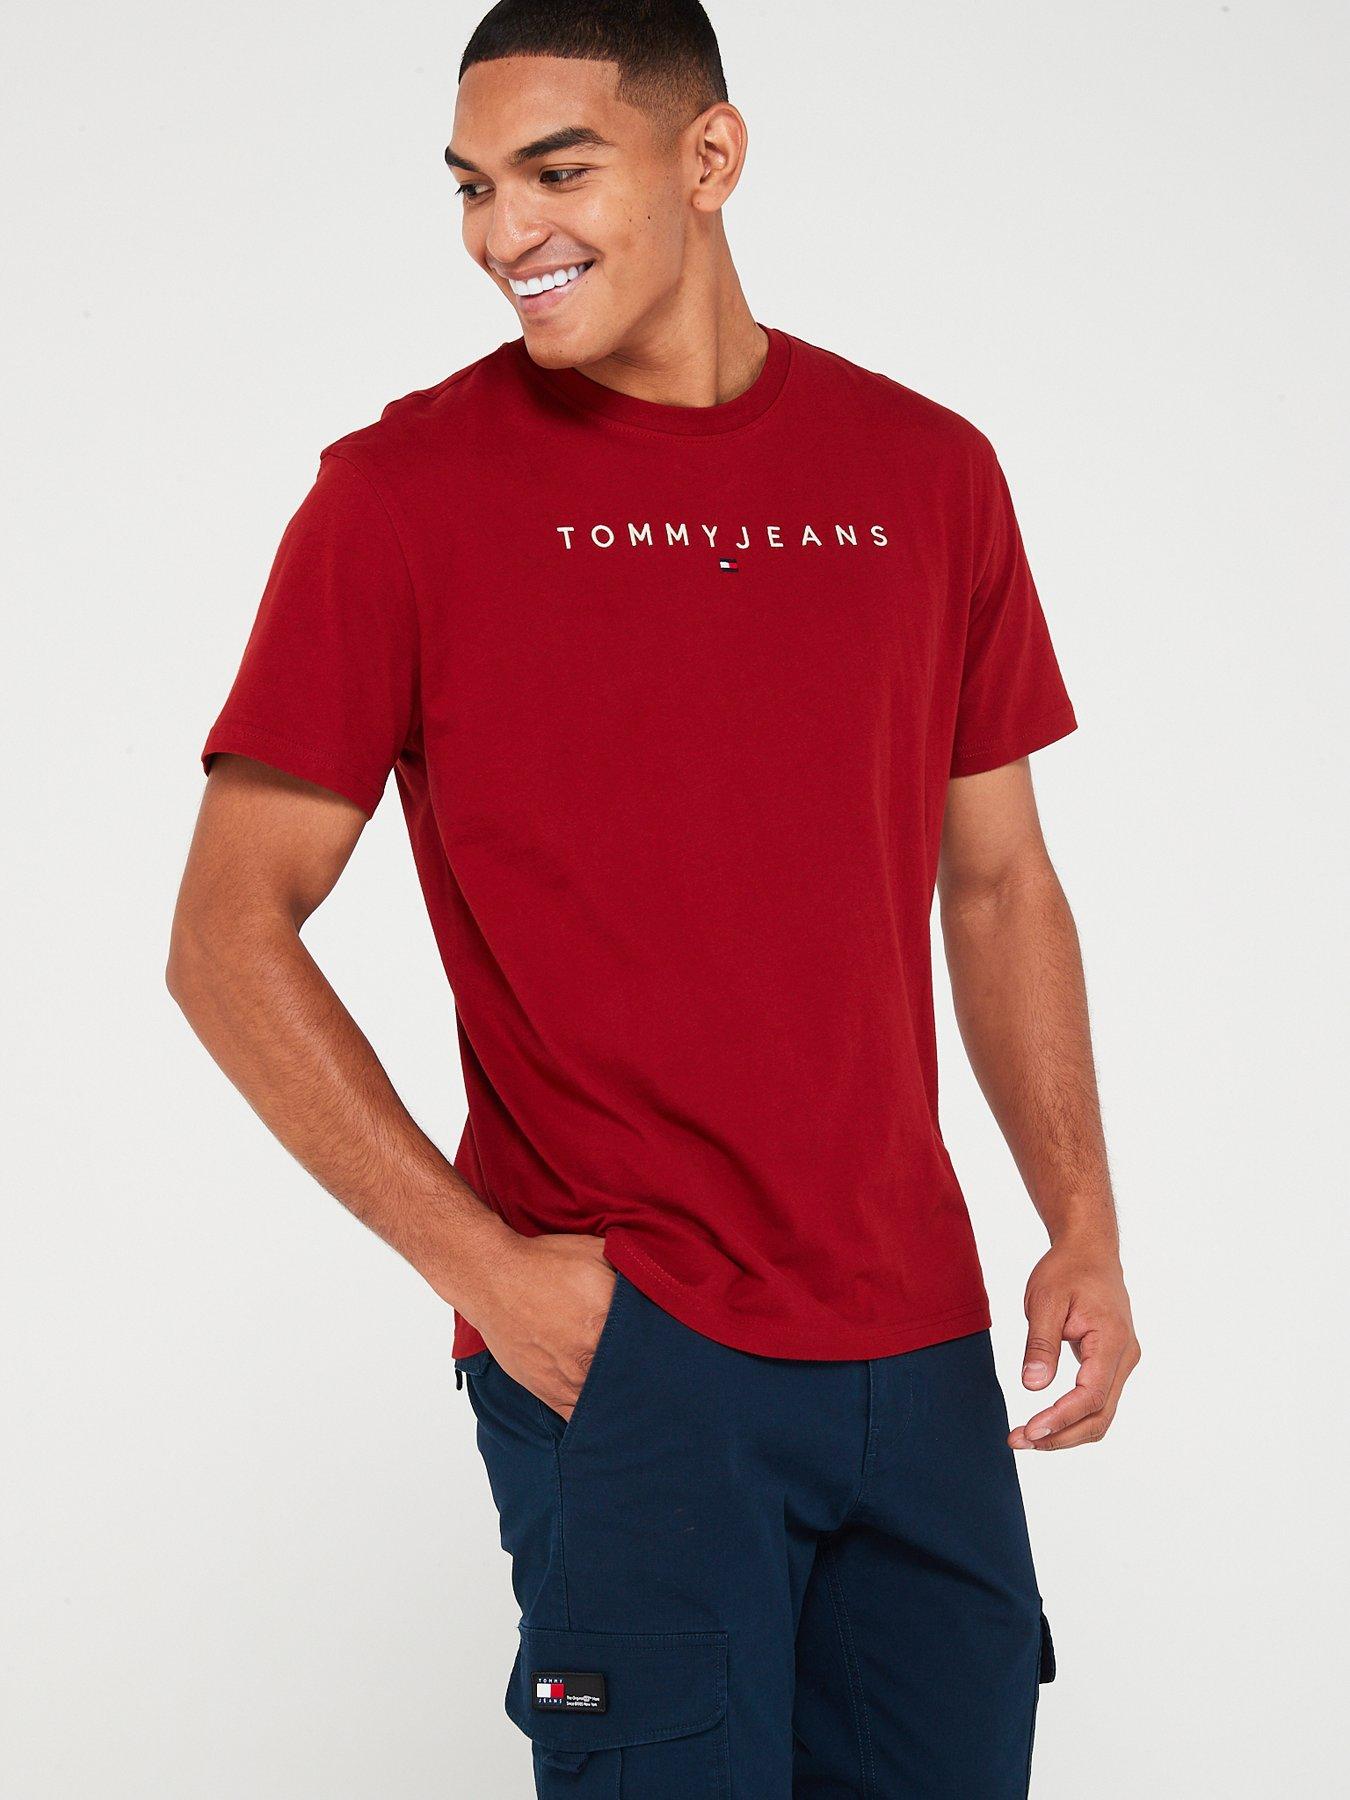 Red | T-shirts Men | hilfiger | | & Tommy Very polos Ireland